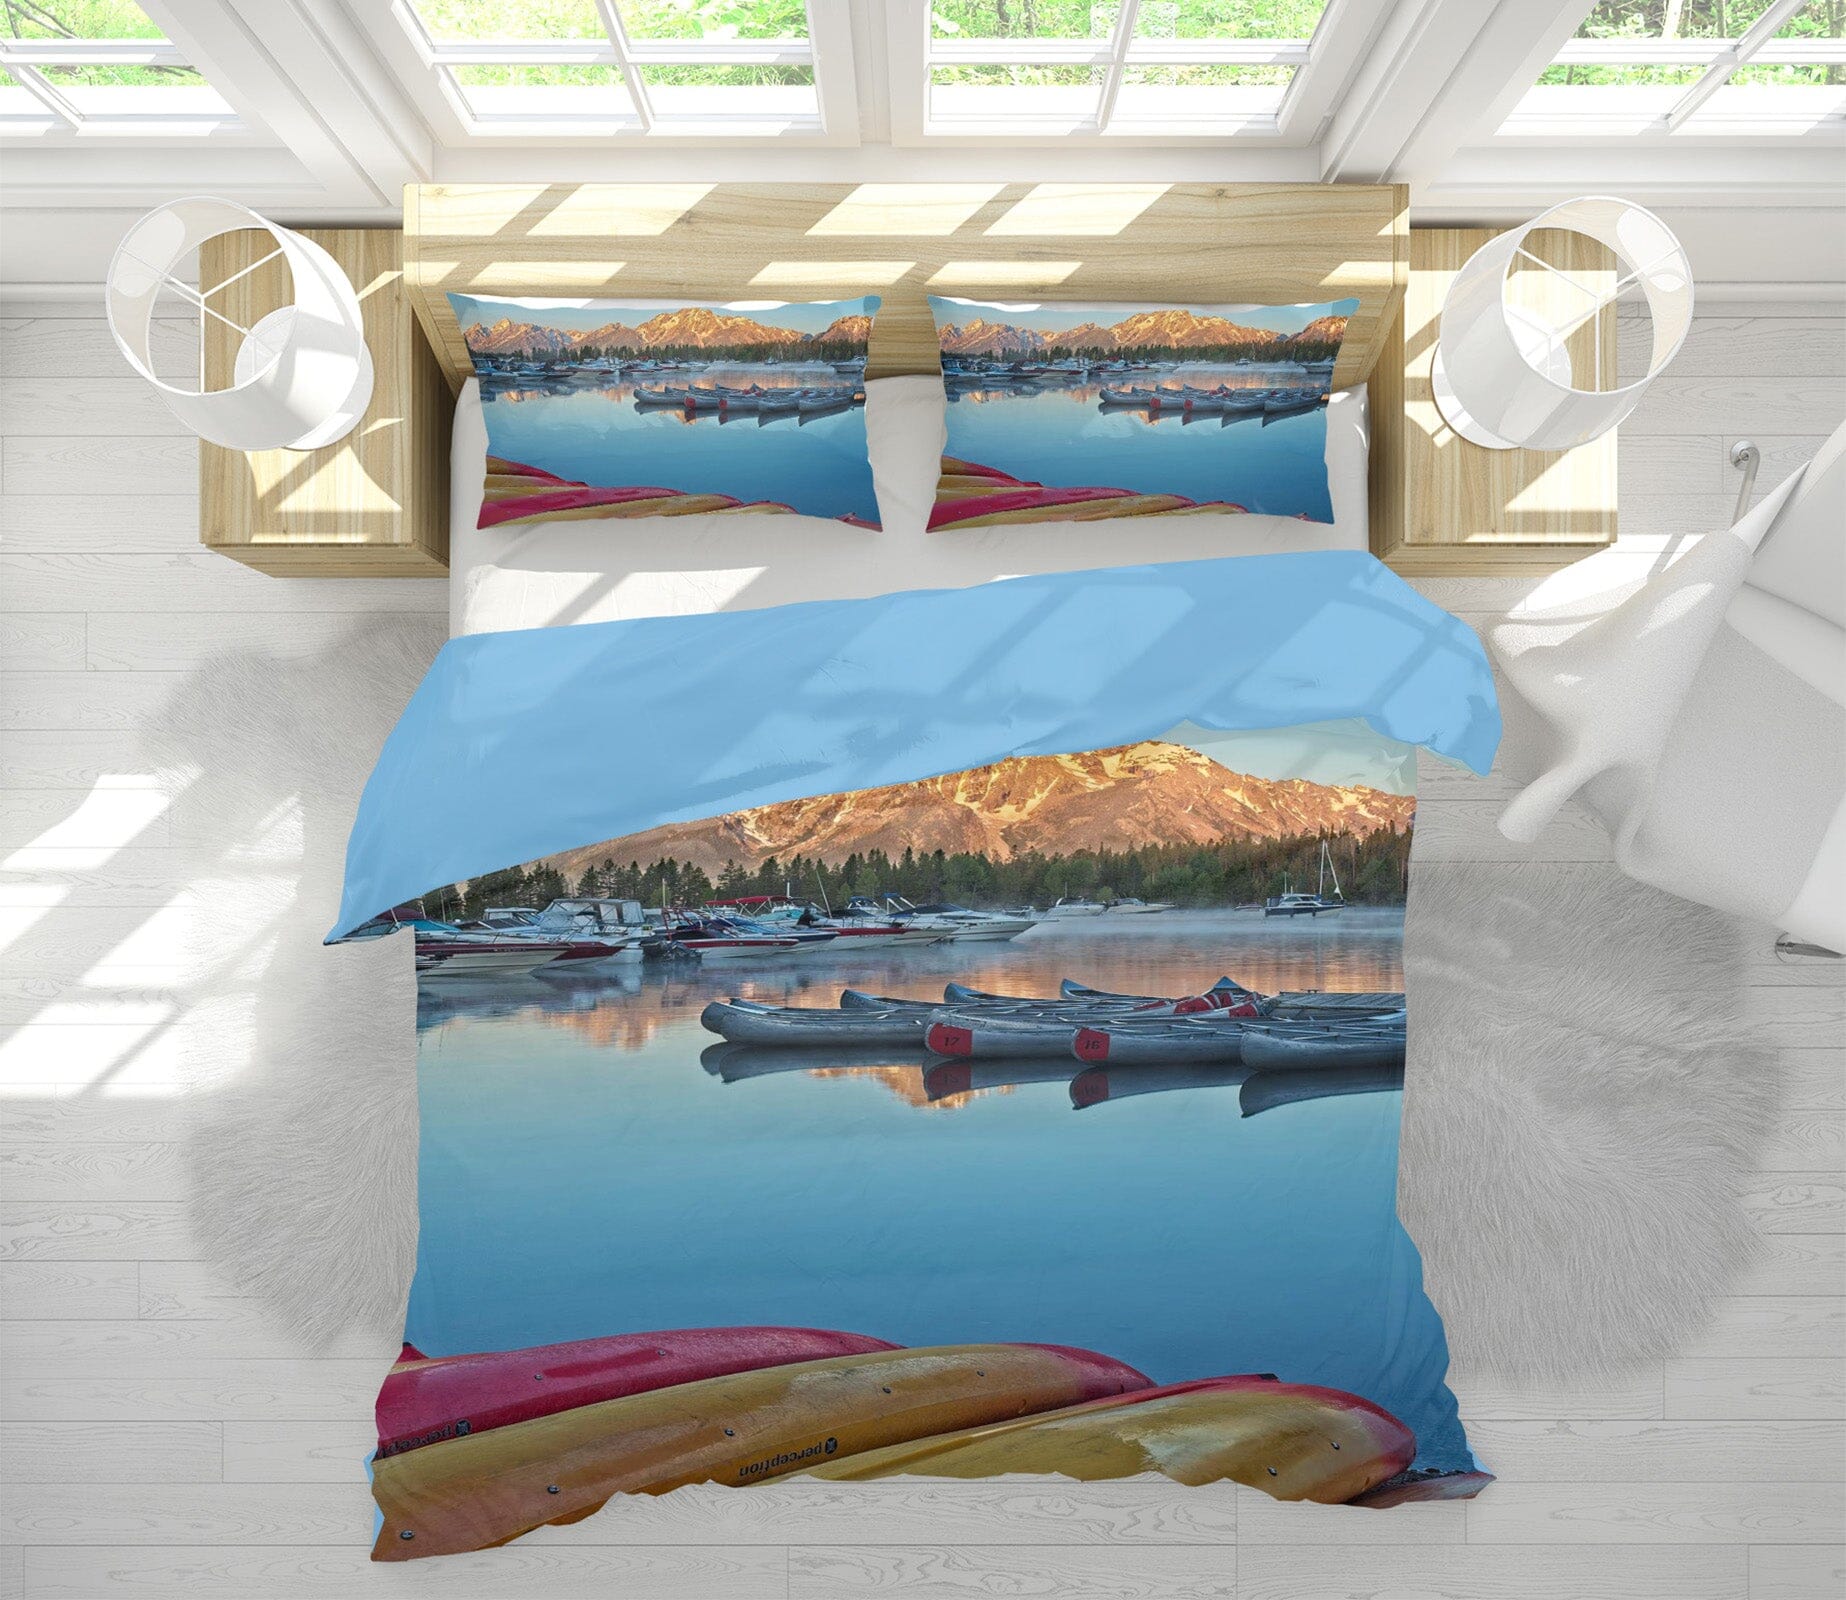 3D Waterside Mountain Peak 2132 Kathy Barefield Bedding Bed Pillowcases Quilt Quiet Covers AJ Creativity Home 